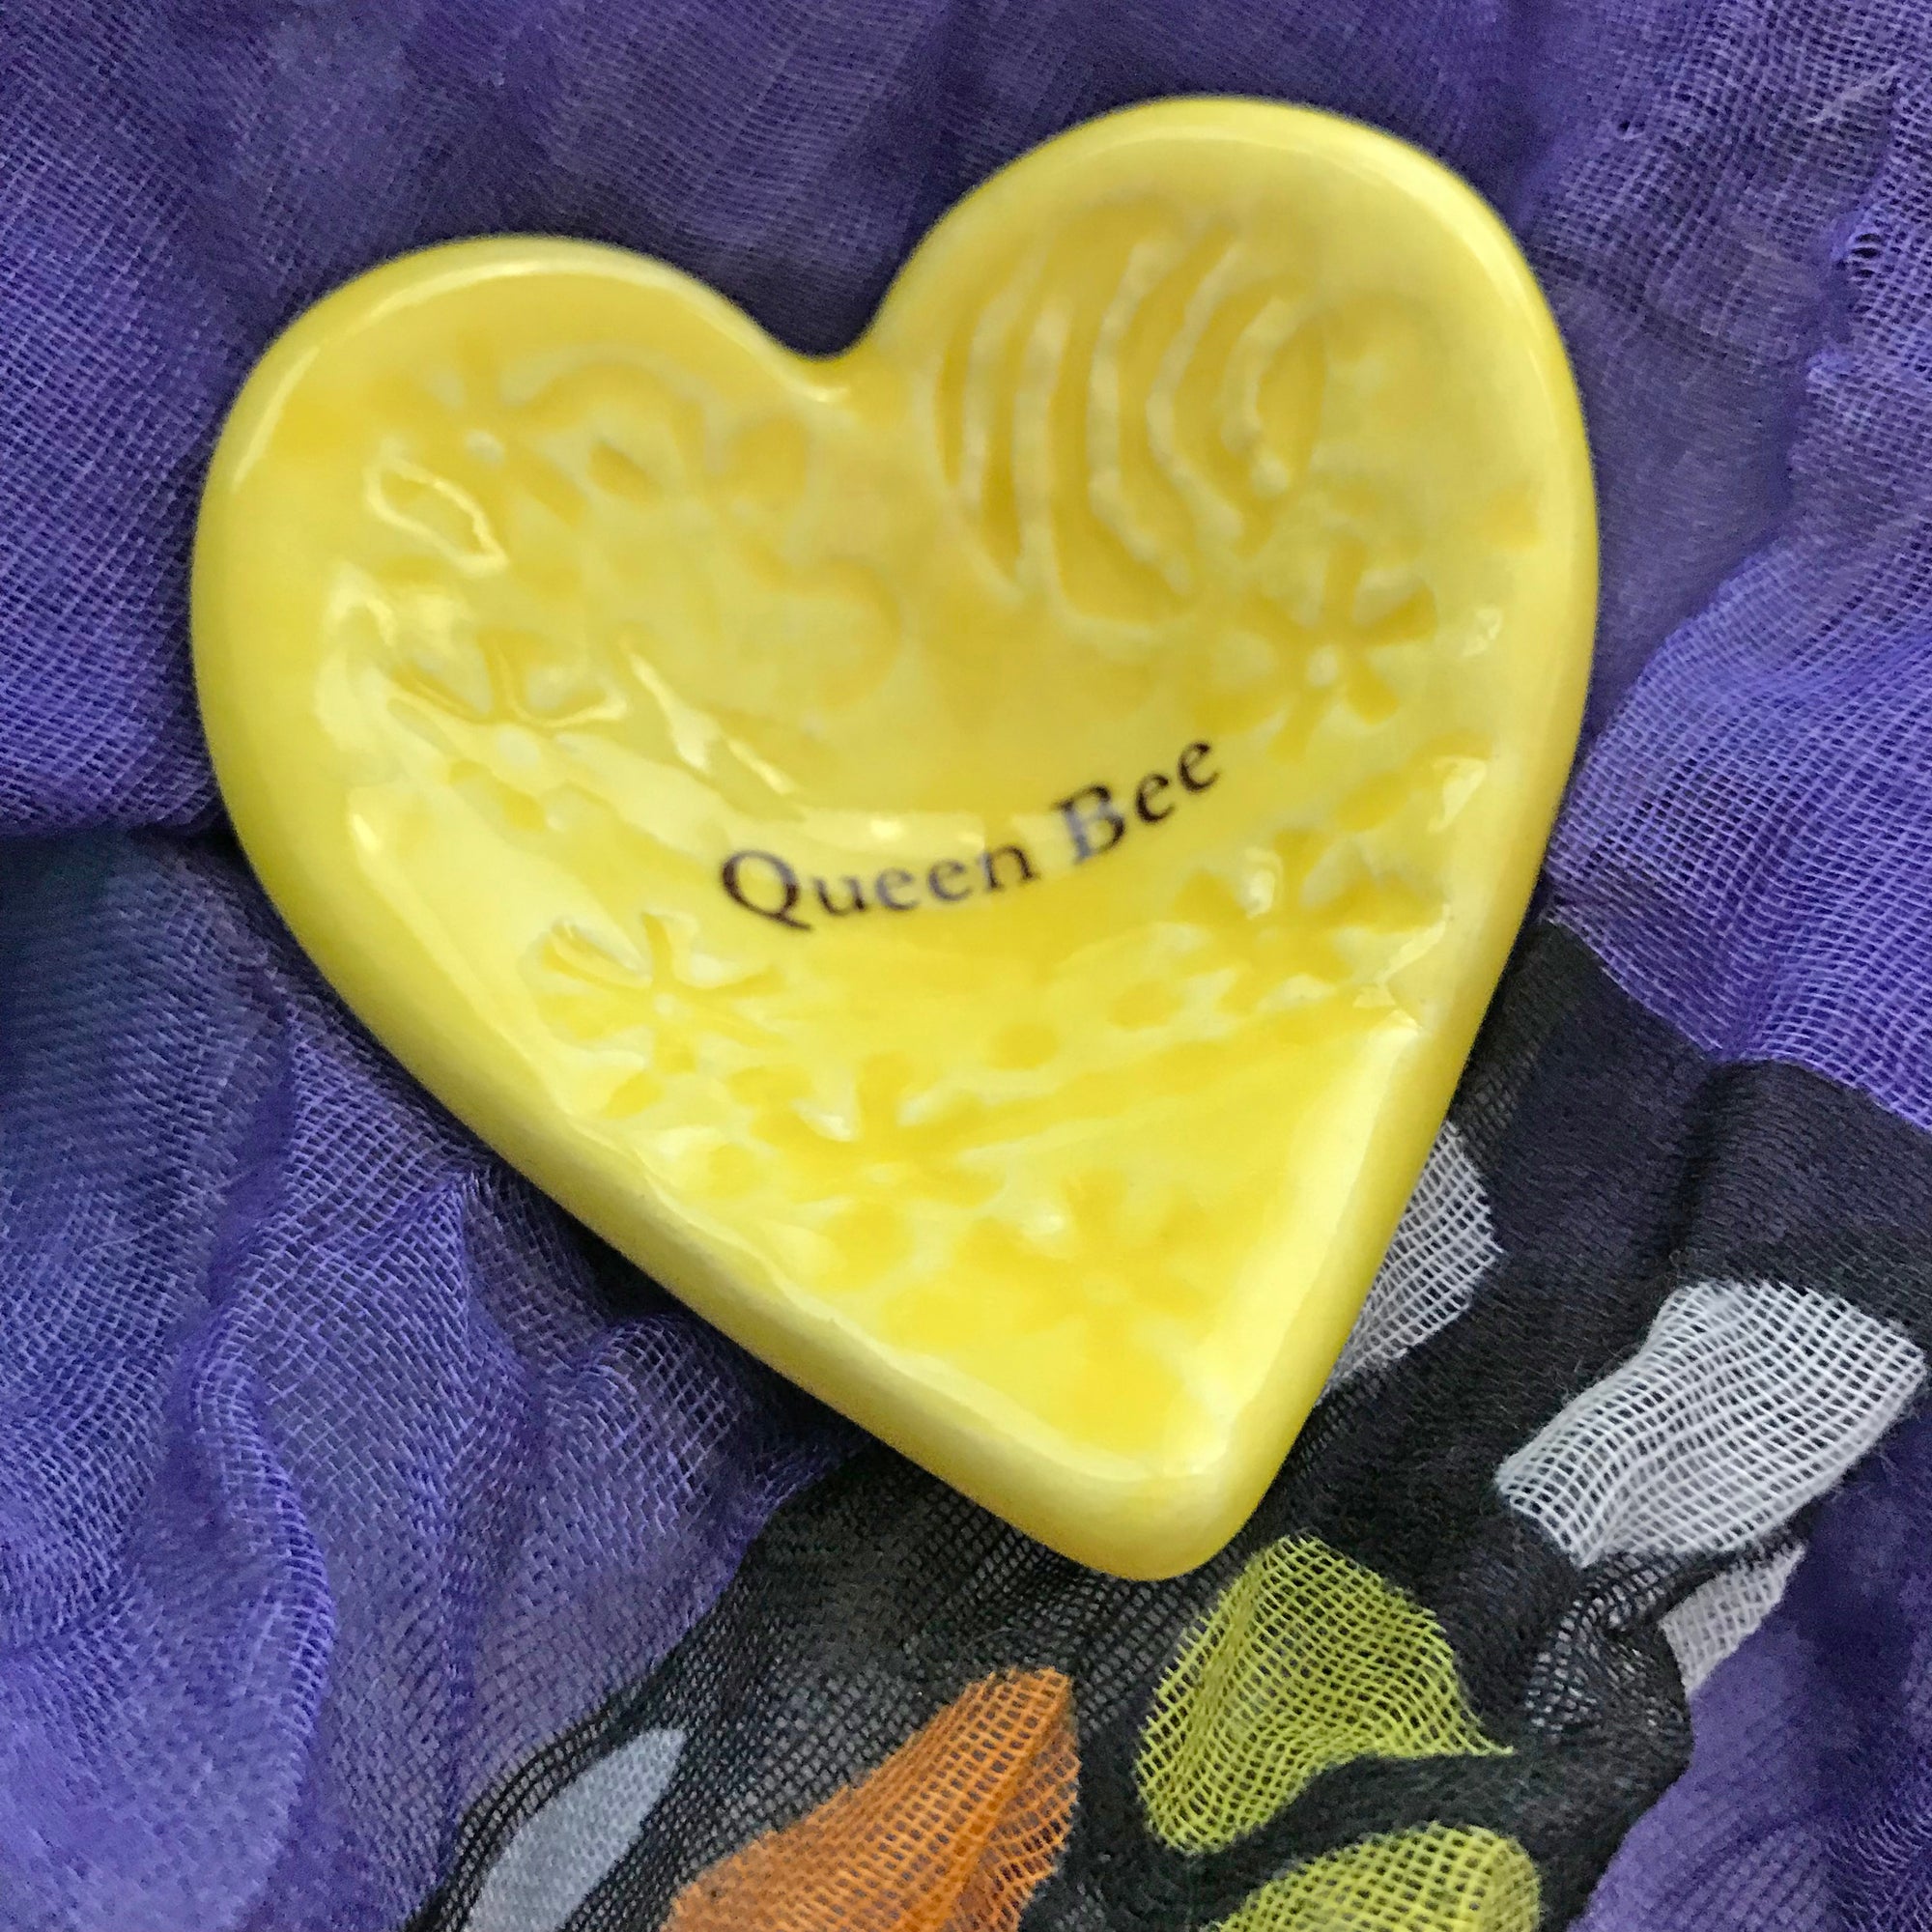 "Queen Bee" Giving Heart is a cute gift for friends and family who have a sense of humor.  